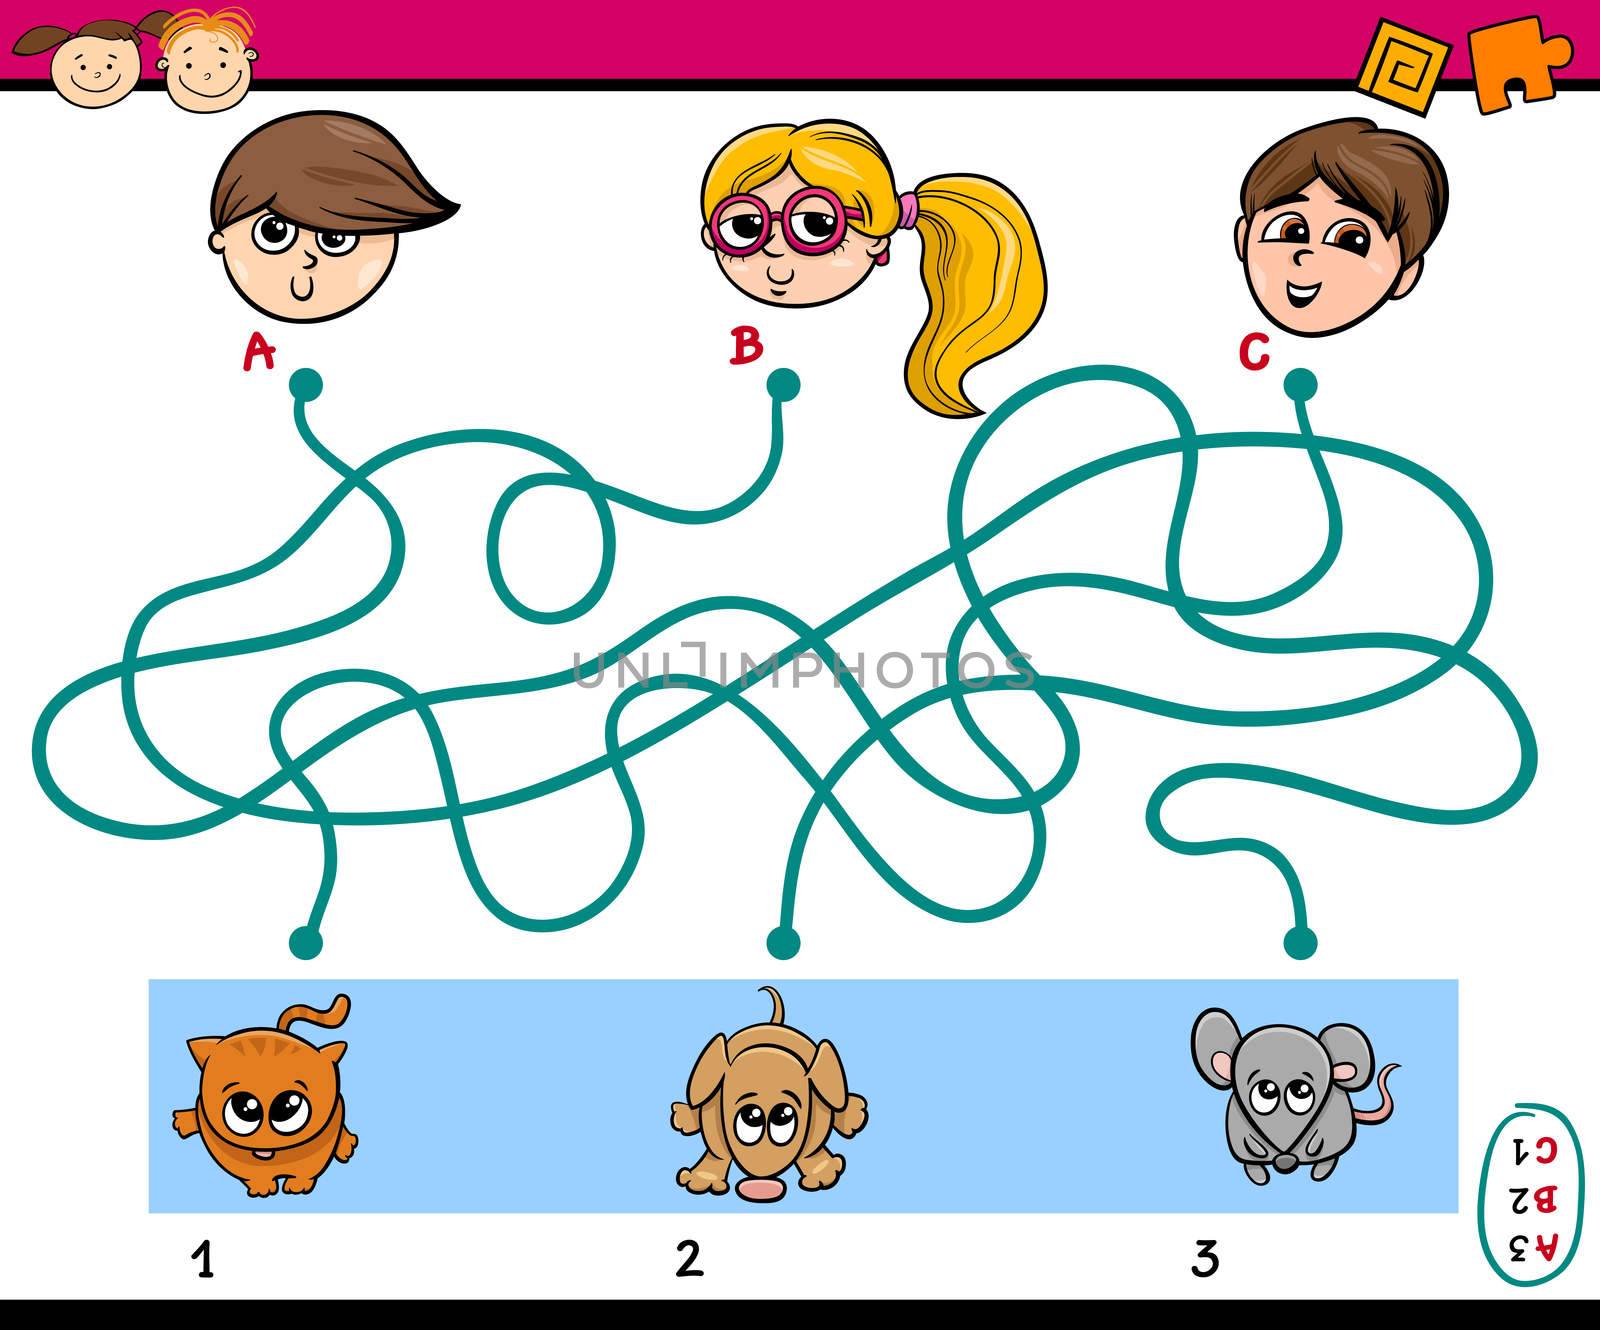 Cartoon Illustration of Education Kindergarten Paths or Maze Puzzle Task for Preschoolers with Children and Pets